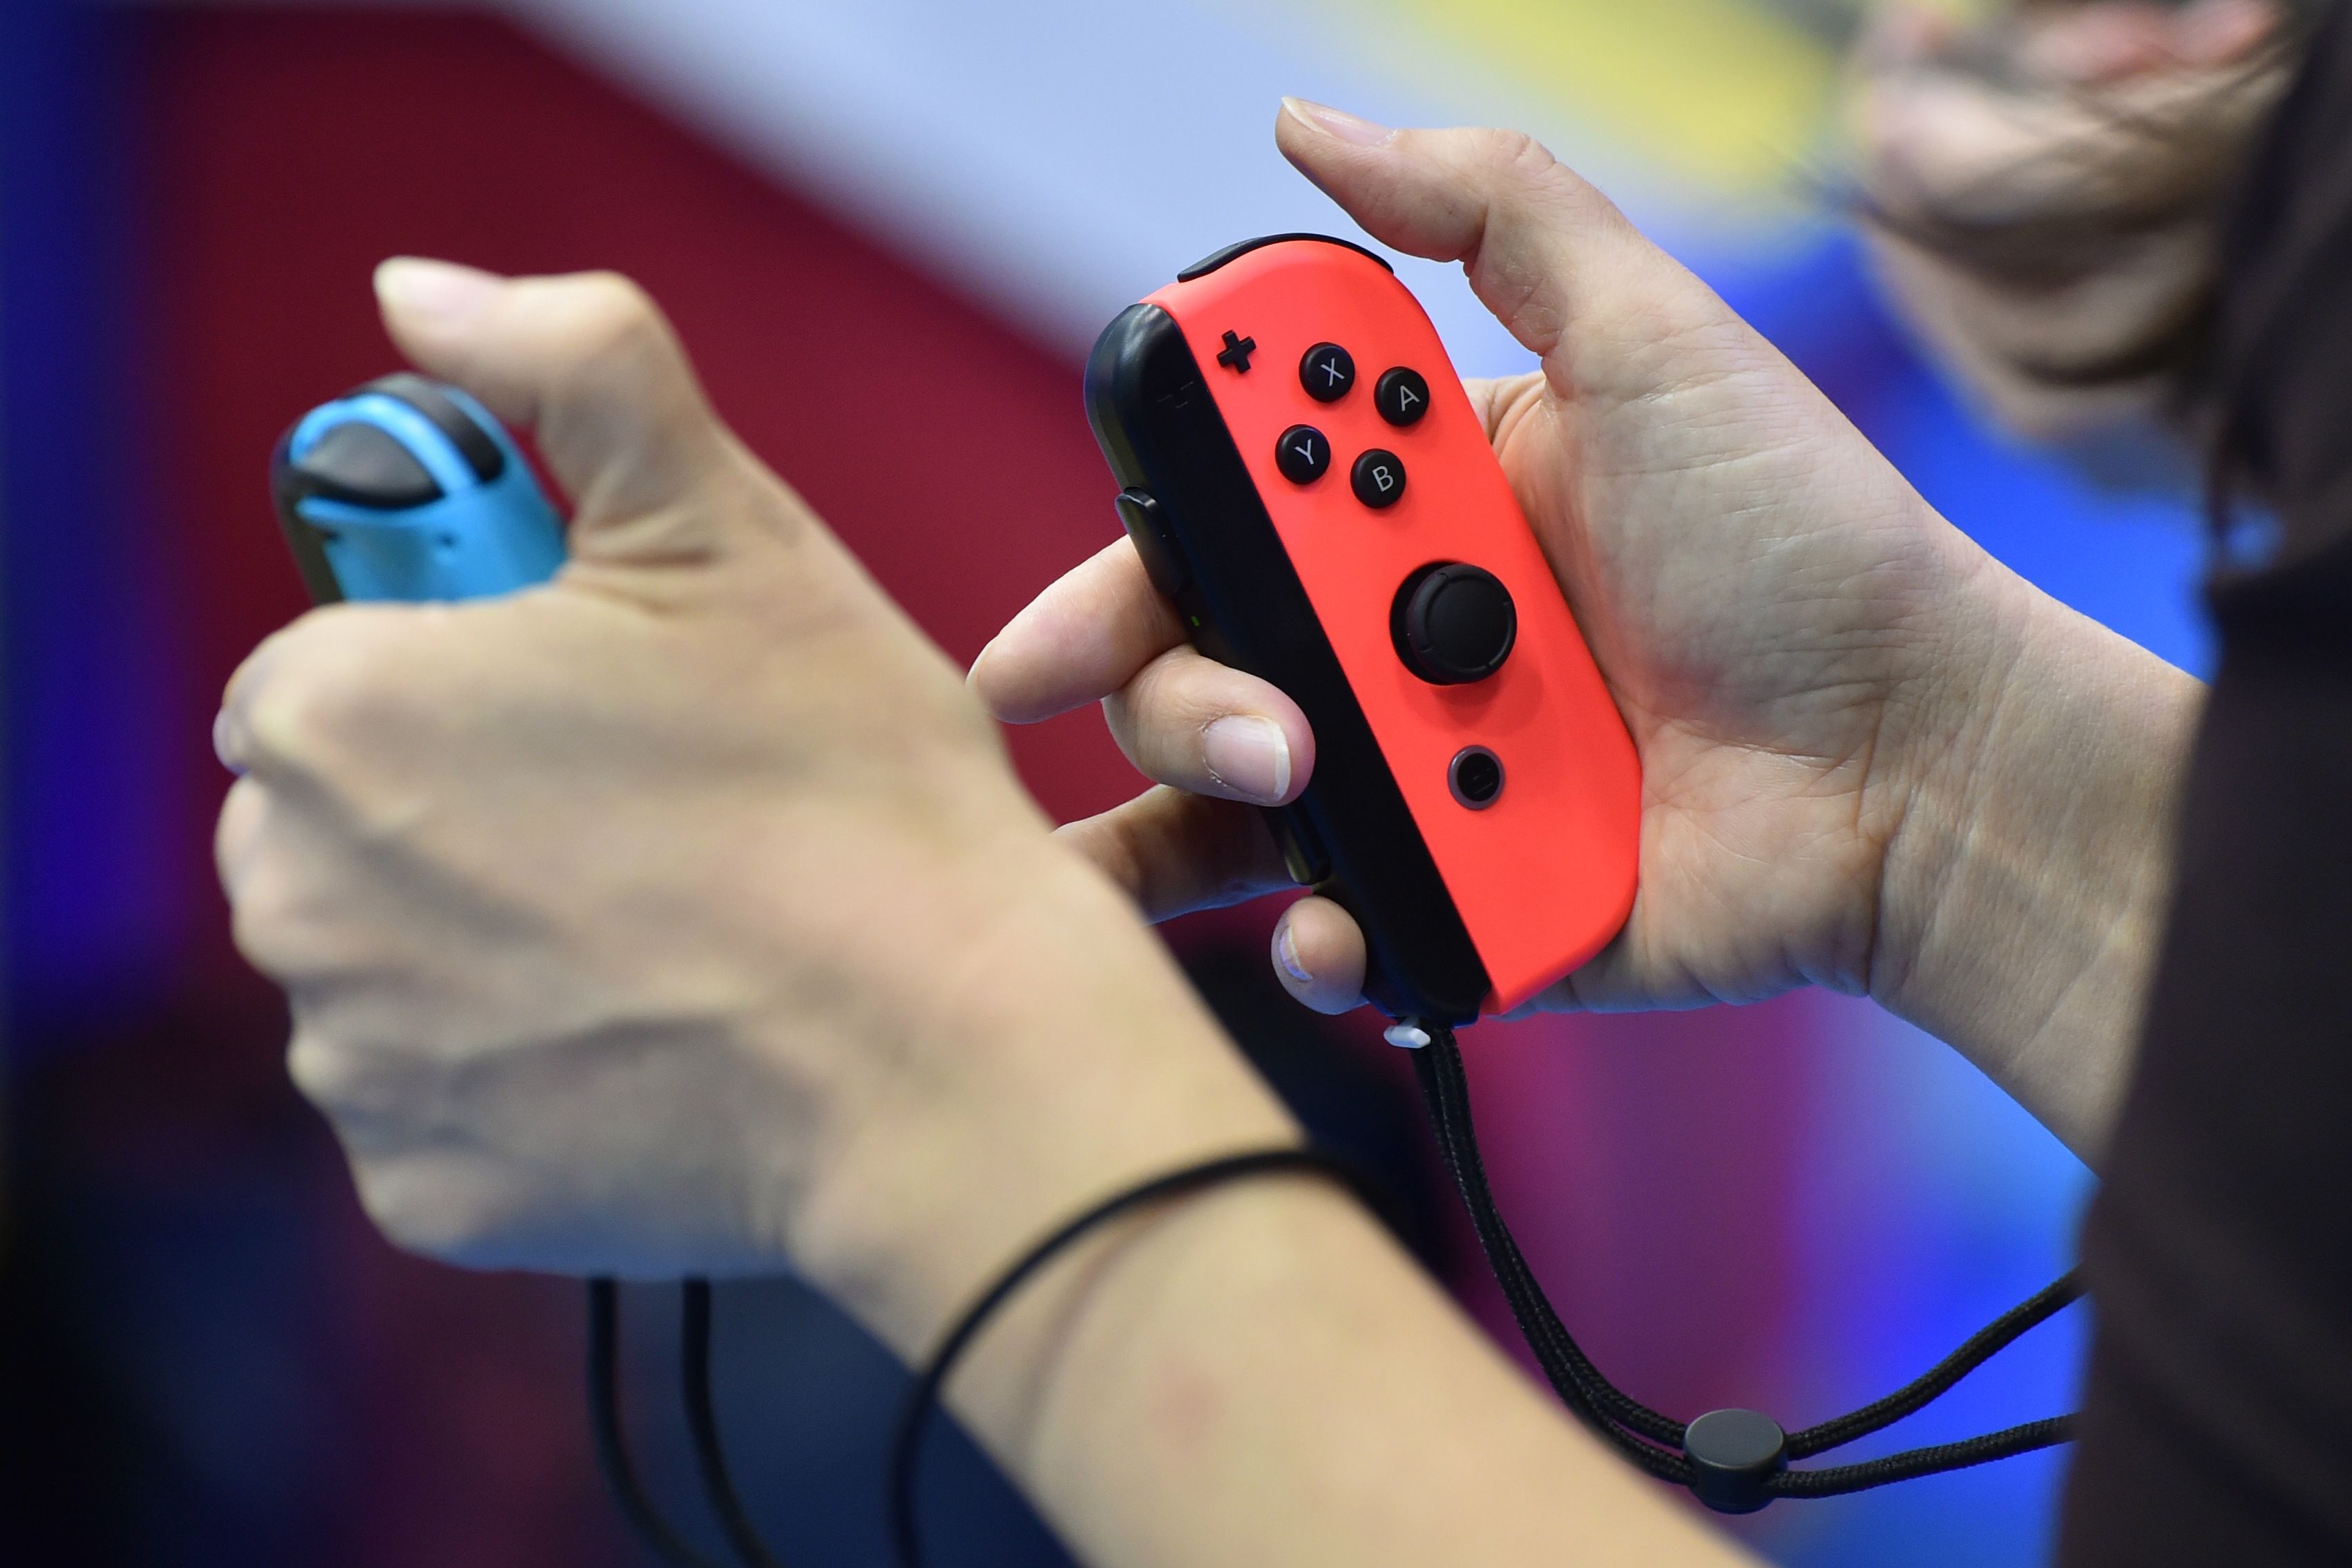 Visitors play Nintendo's new video game console Switch during its presentation in Tokyo on January 13, 2017. (Kazuhiro NogI&mdash;AFP/Getty Images)